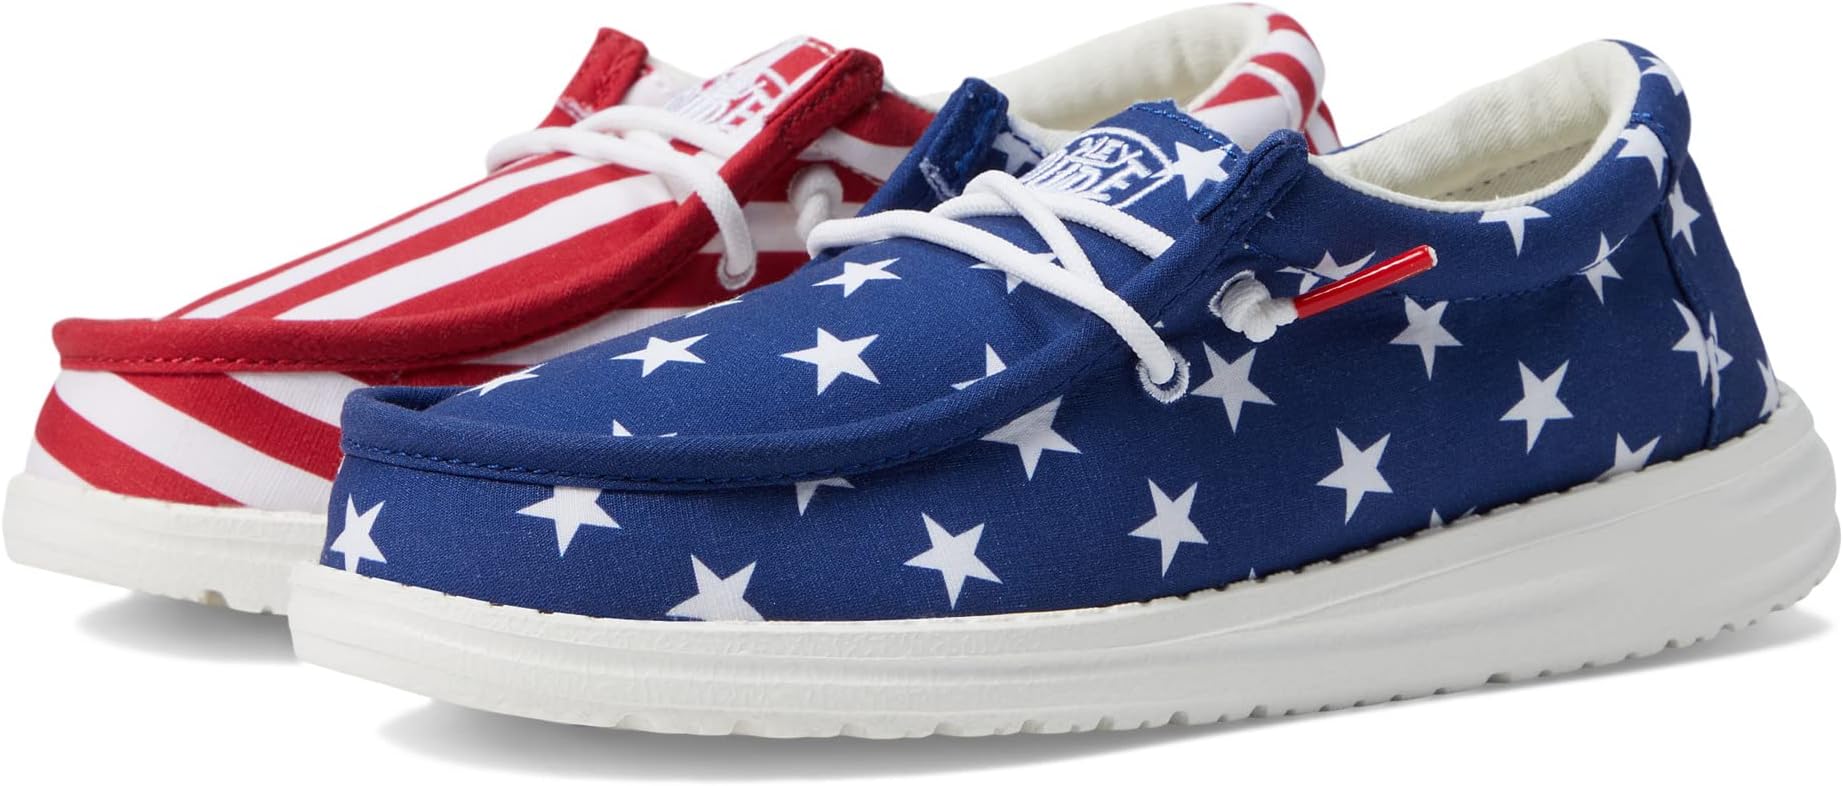 Кроссовки Wally Patriotic Slip-On Casual Shoes Hey Dude, цвет American Flag american flag eagle necklaces male gold color iced out animal charm pendant